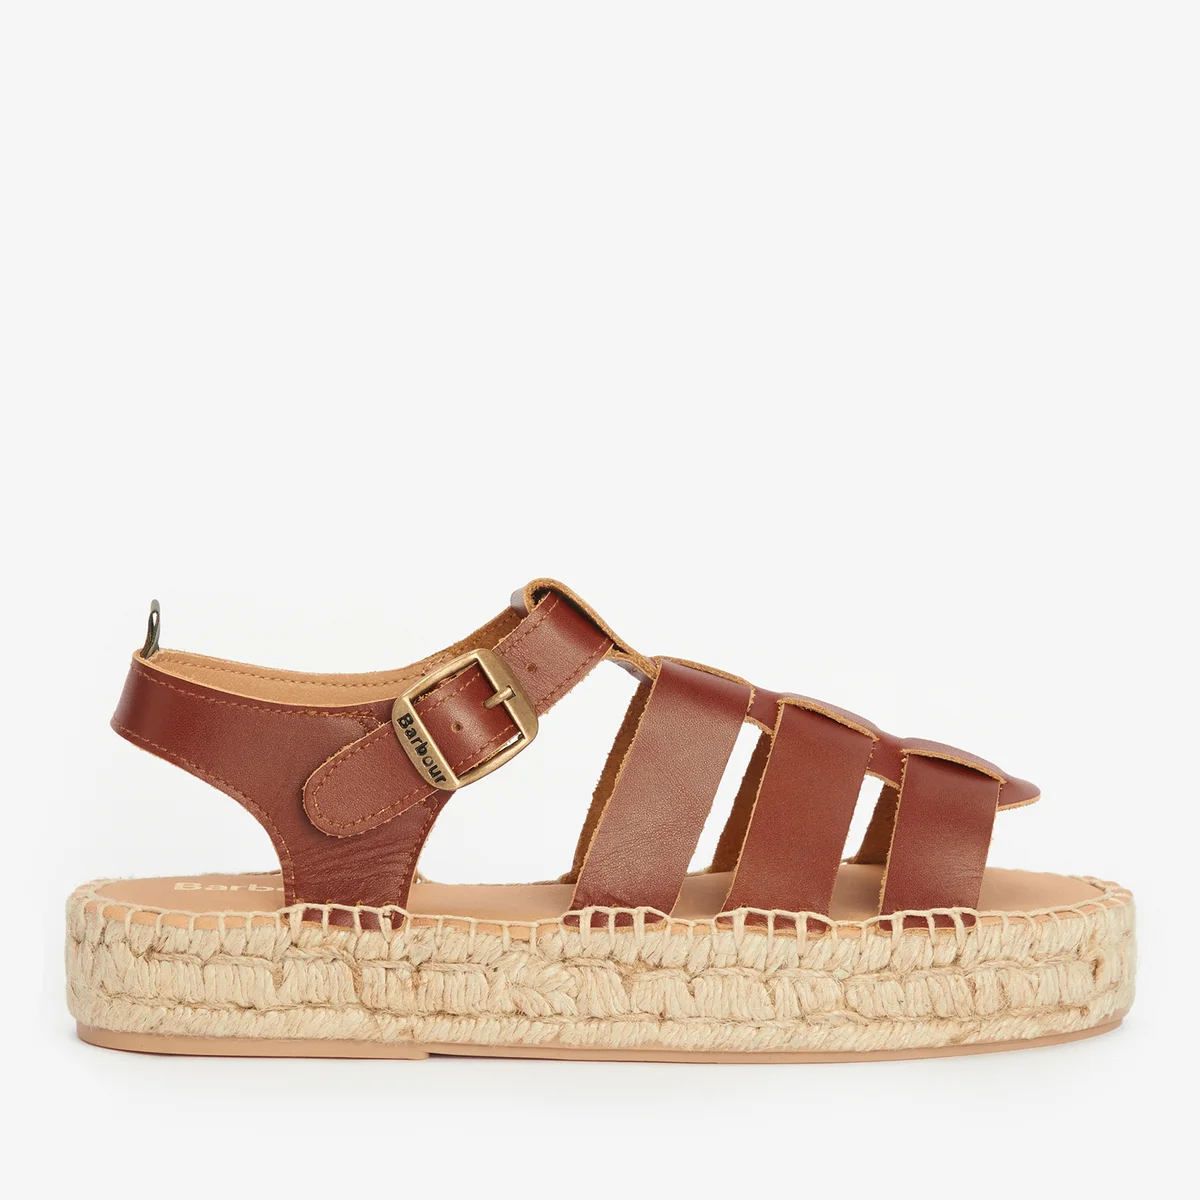 Barbour Women's Paloma Fisherman Leather Espadrille Sandals Image 1